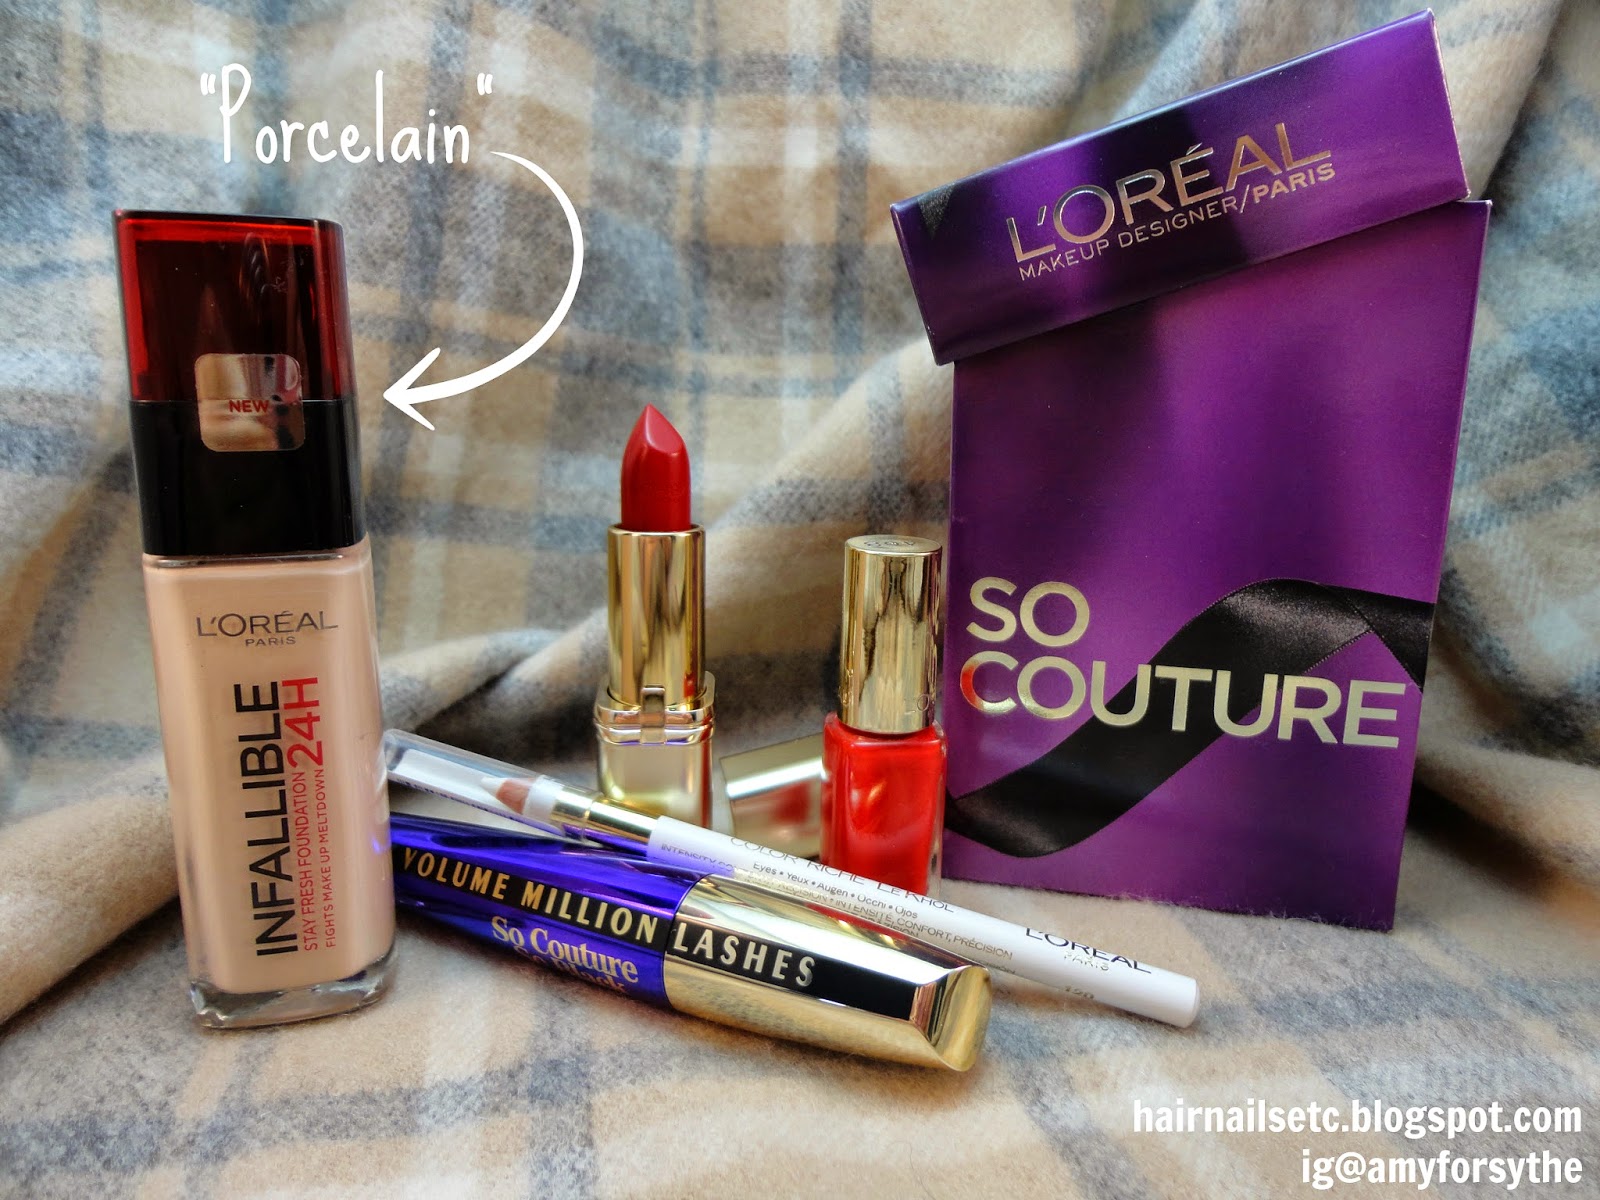 Boots UK Beauty Haul - L'Oreal Infallible Foundation, Million Lashes So Couture Mascara, Color Riche LeKohl, Color Riche Lipstick, Color Riche Nails